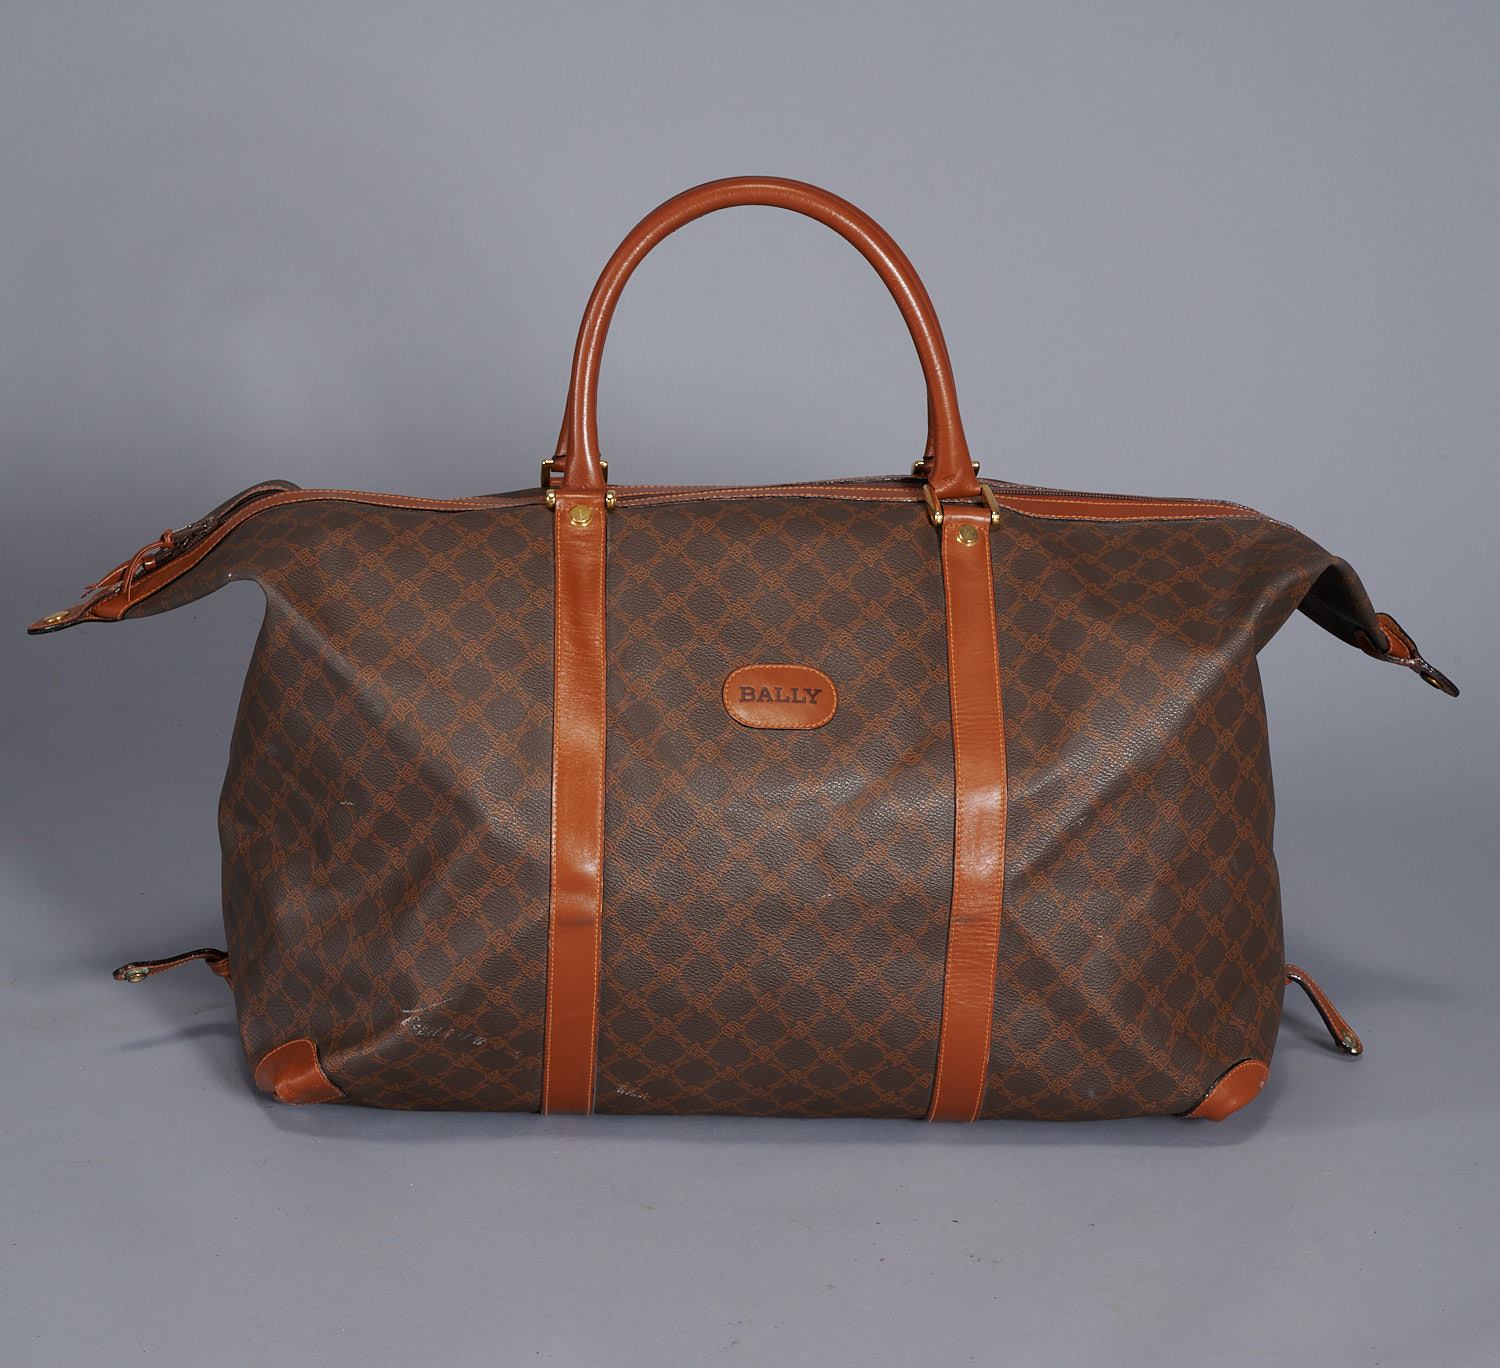 Sold at Auction: (2) Vintage Louis Vuitton Monogram Luggage & Tote Bags